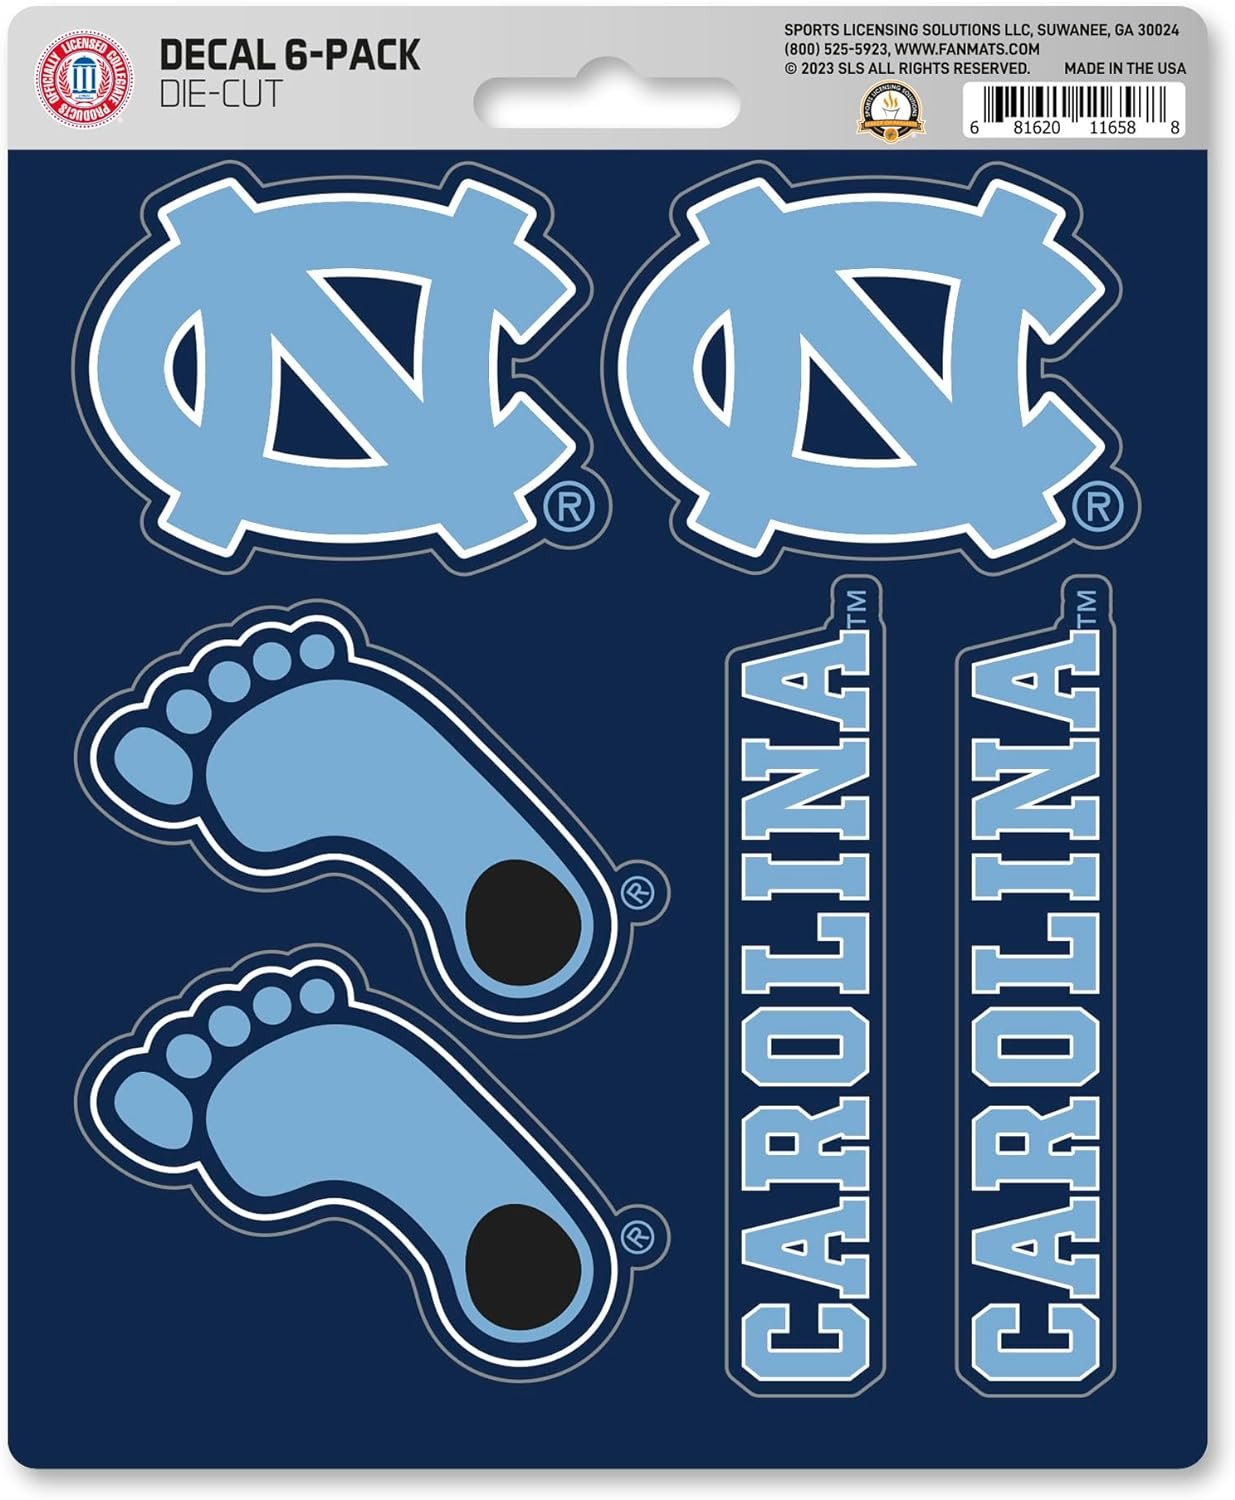 University of North Carolina Tar Heels 6-Piece Decal Sticker Set, 5x6 Inch Sheet, Gift for football fans for any hard surfaces around home, automotive, personal items